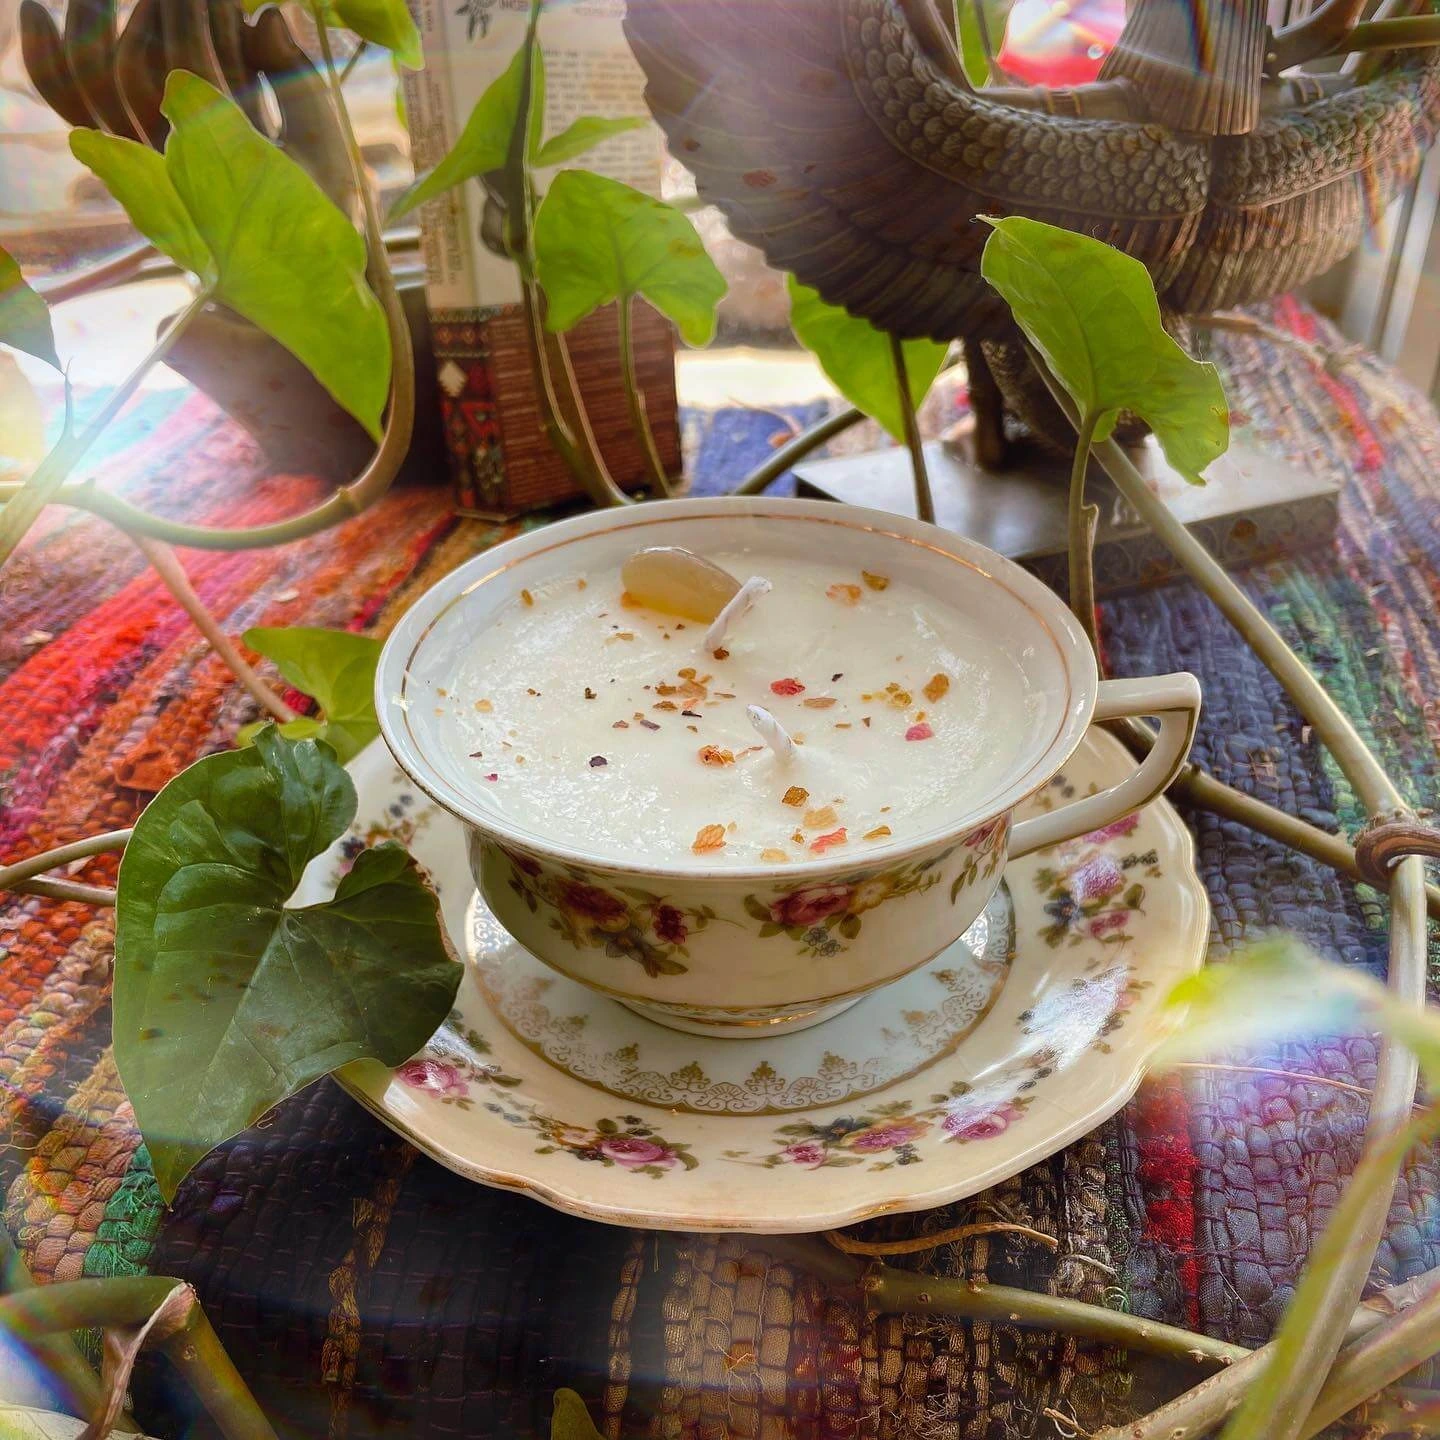 A small teacup with an herbal and scented candle inside it